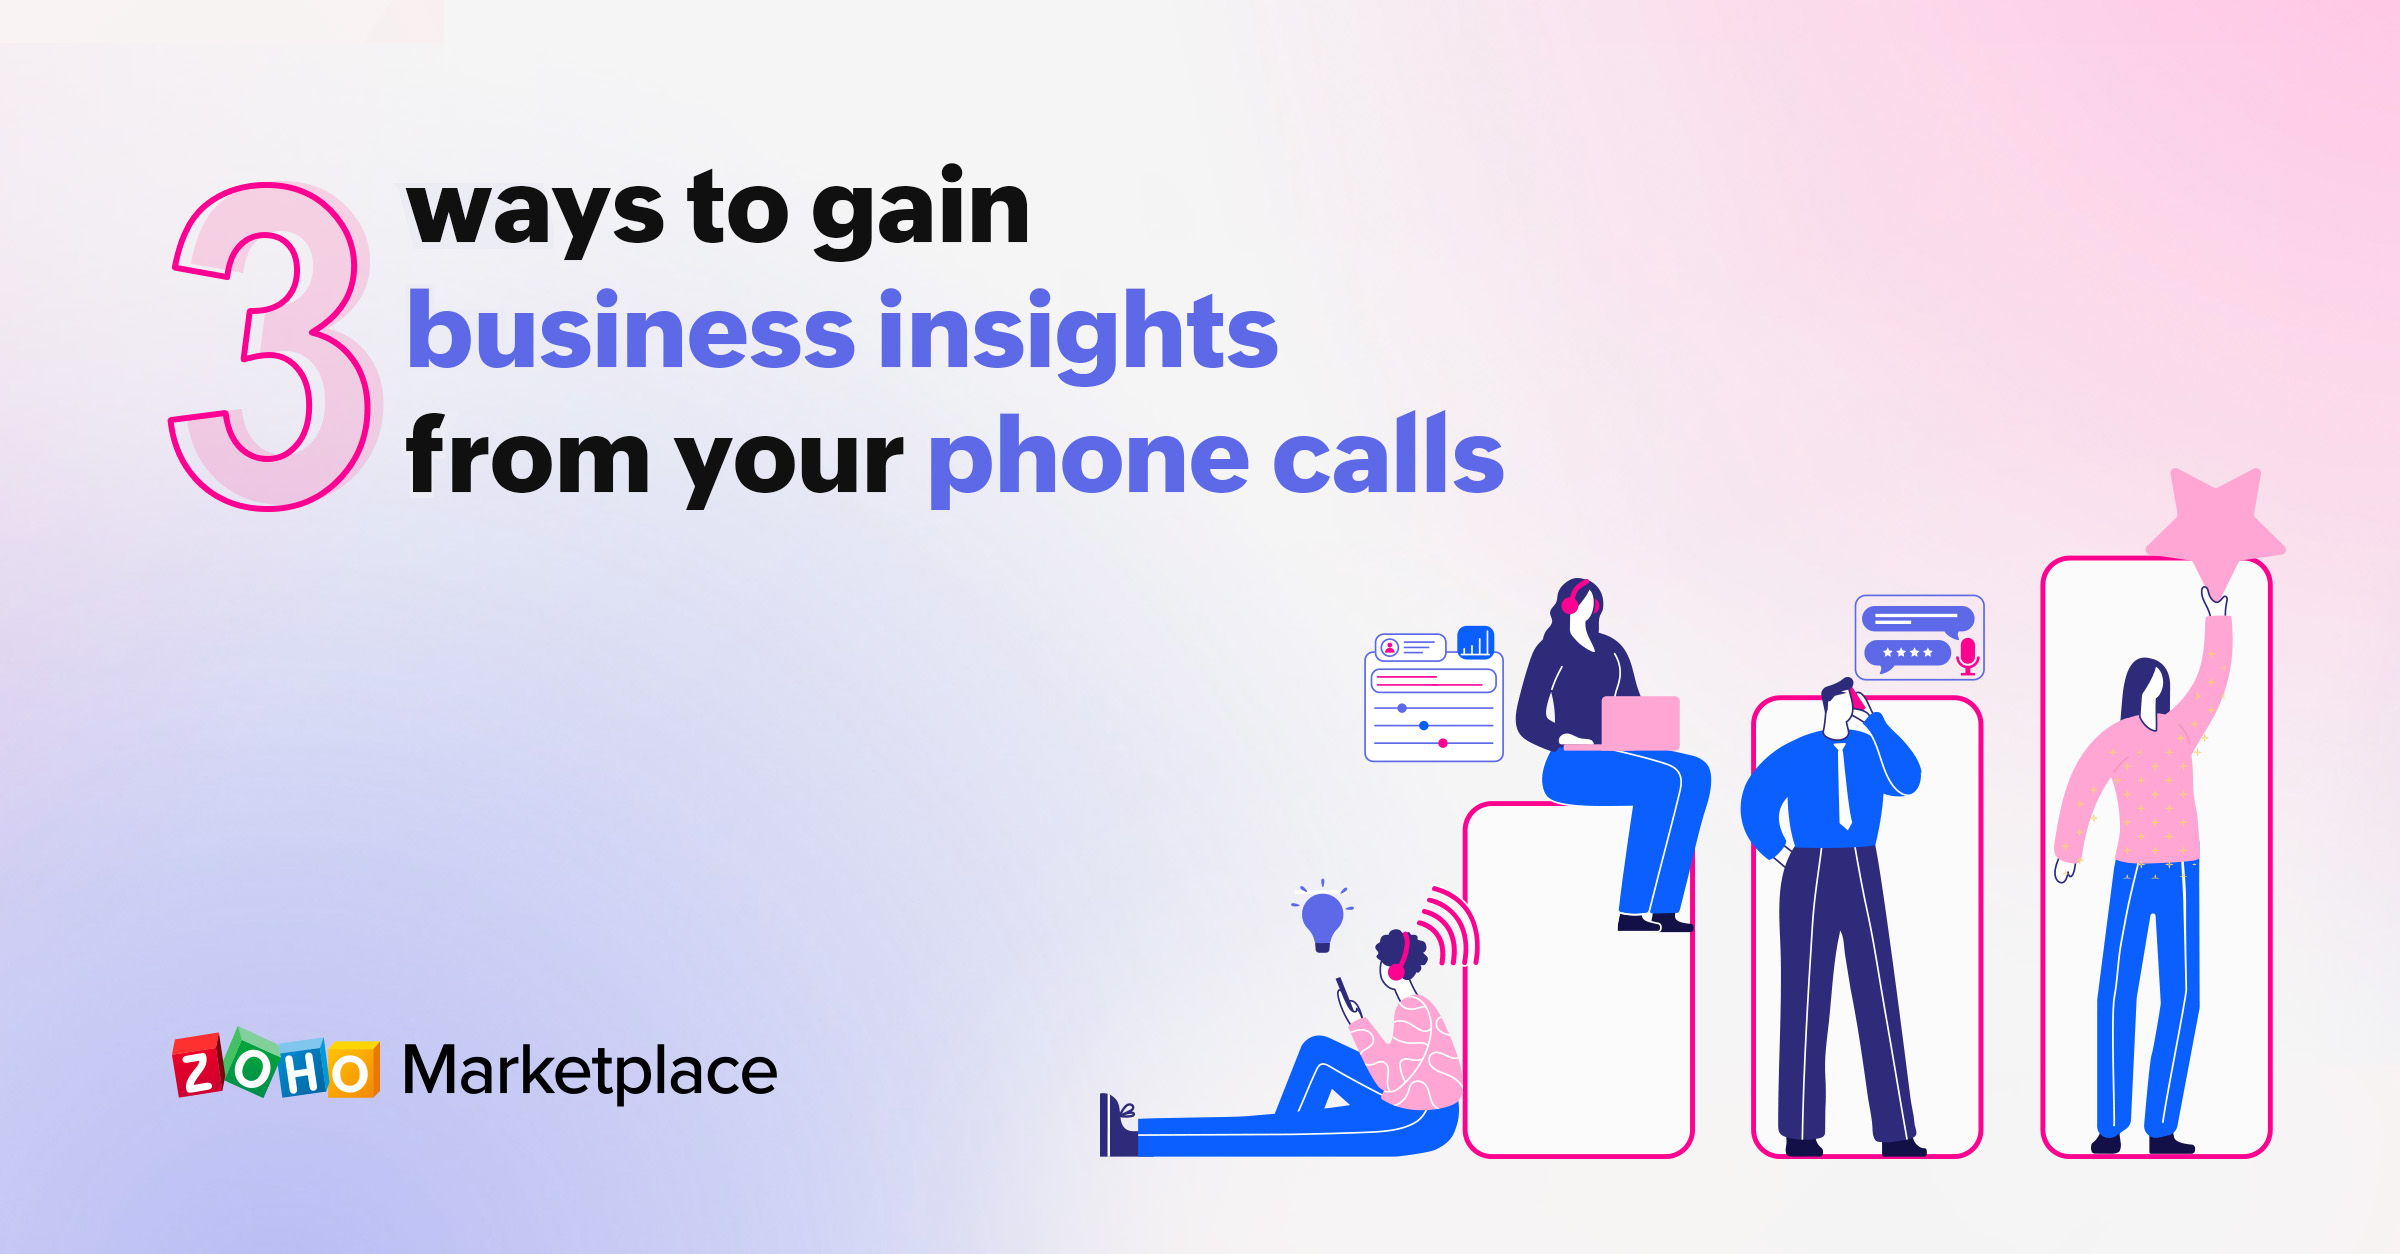 3 ways to gain business insights from your phone calls